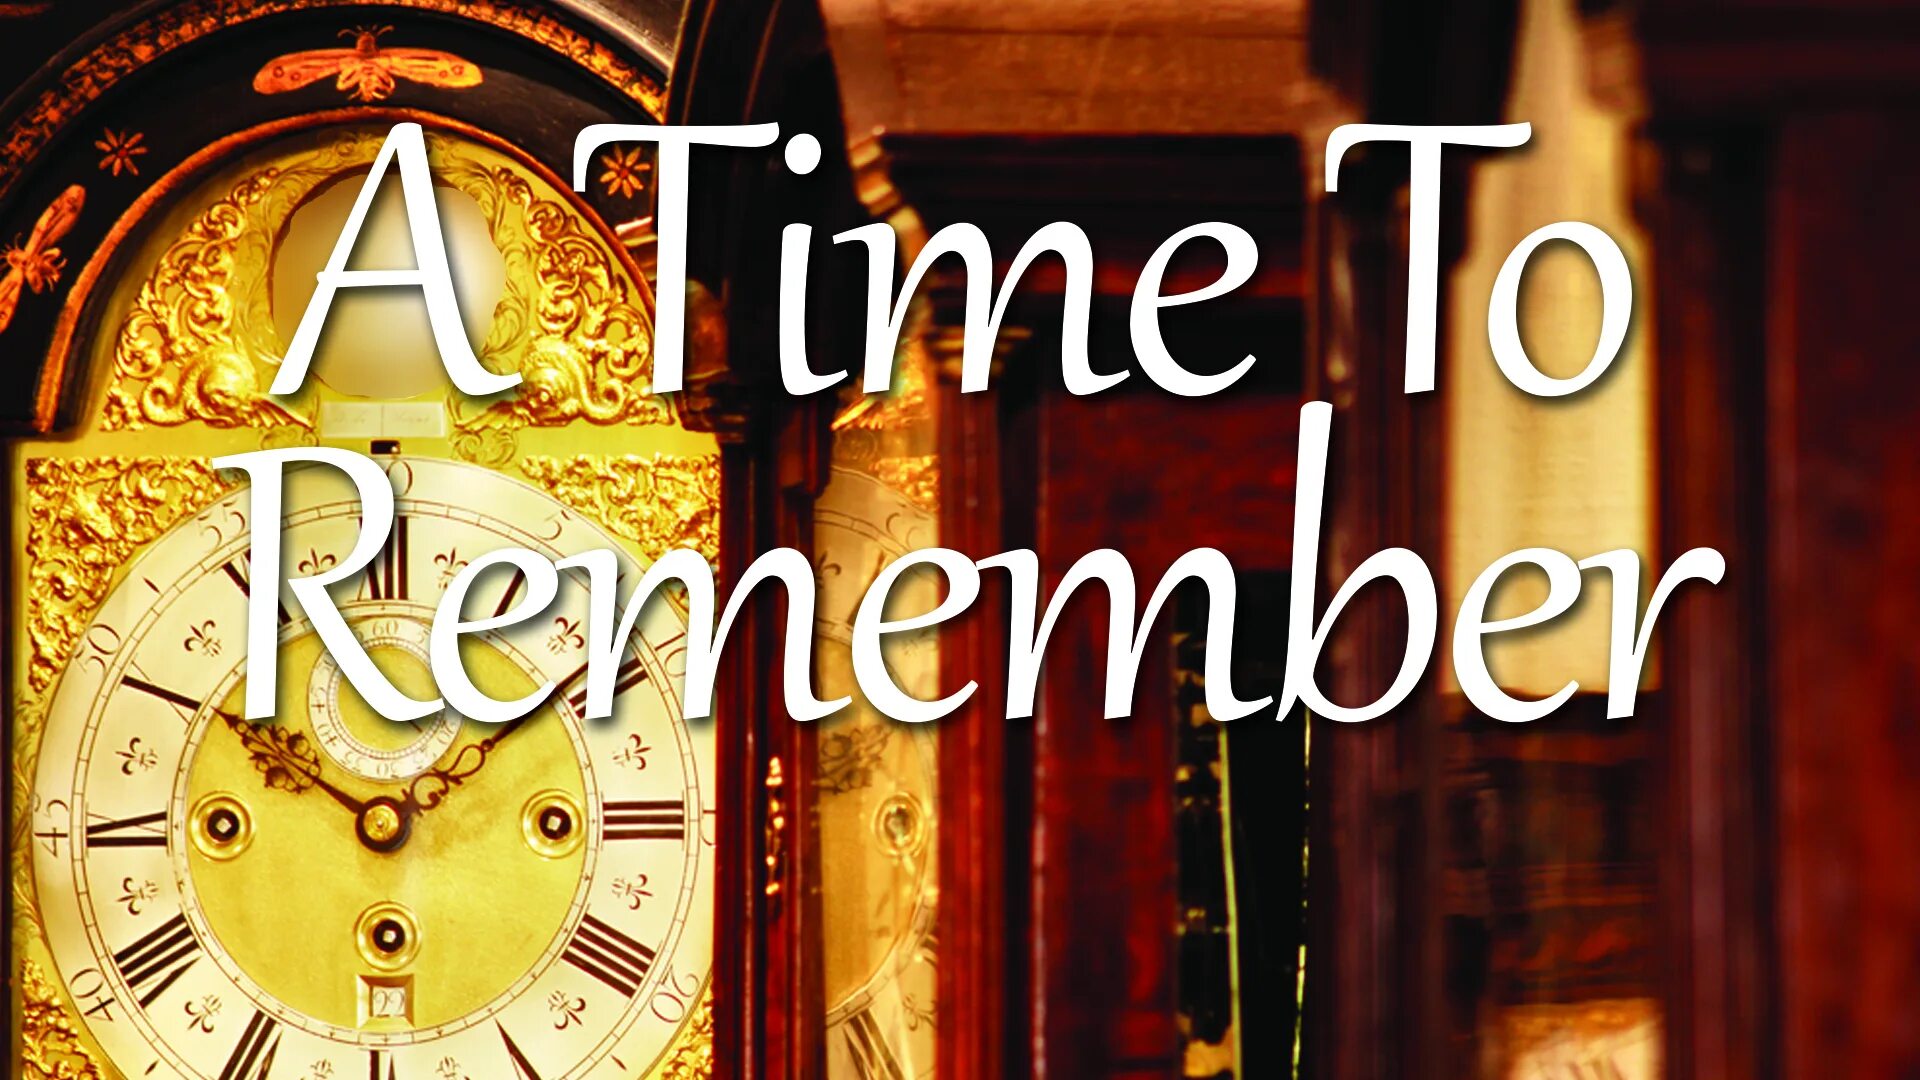 A year to remember. A time to remember. It is time to remember. Time to Loveposter.